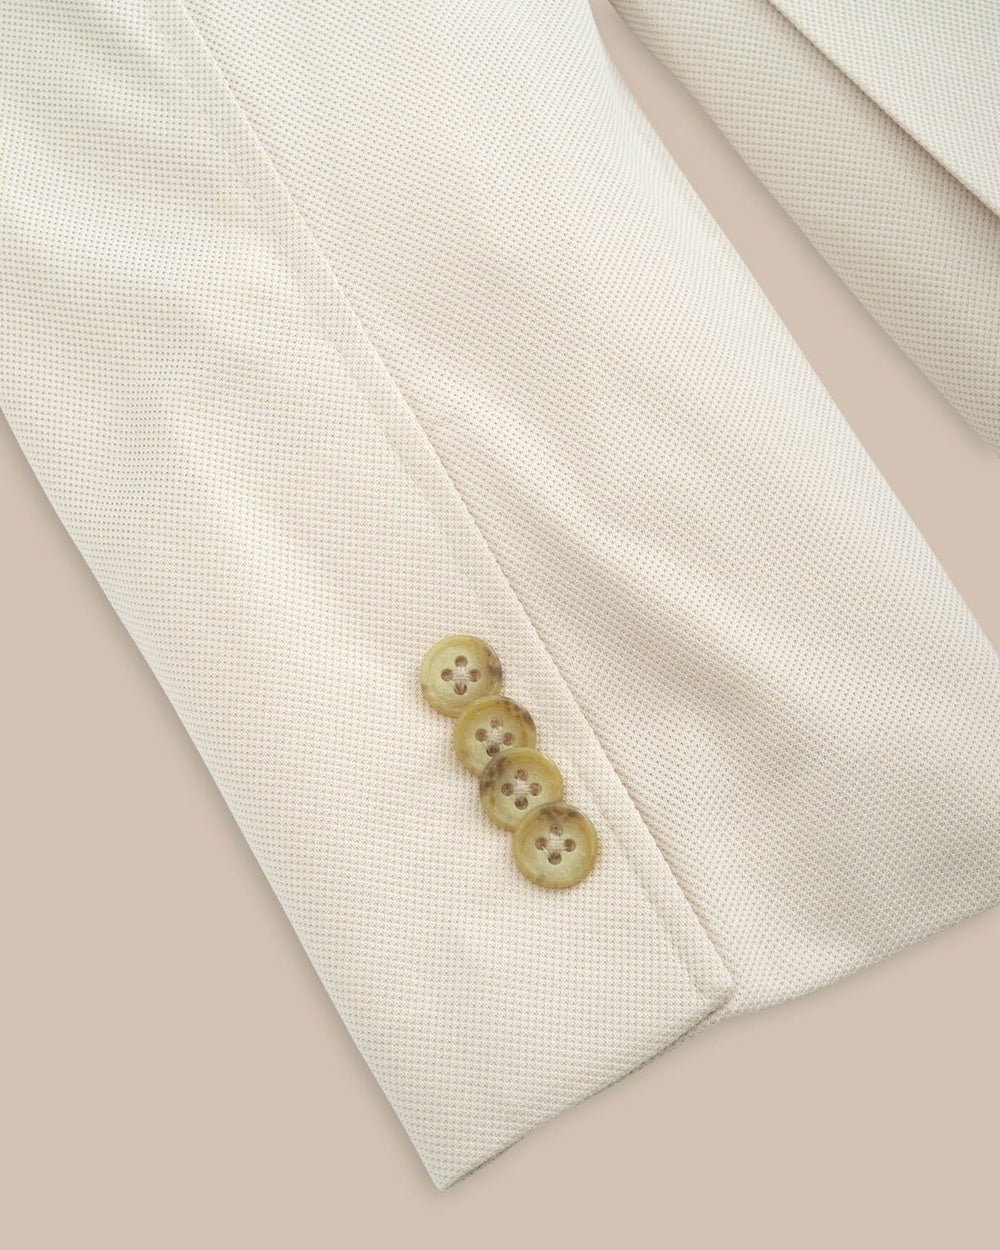 The detail view of the Southern Tide Charleston Navy Blazer by Southern Tide - Perfectly Pale Khaki